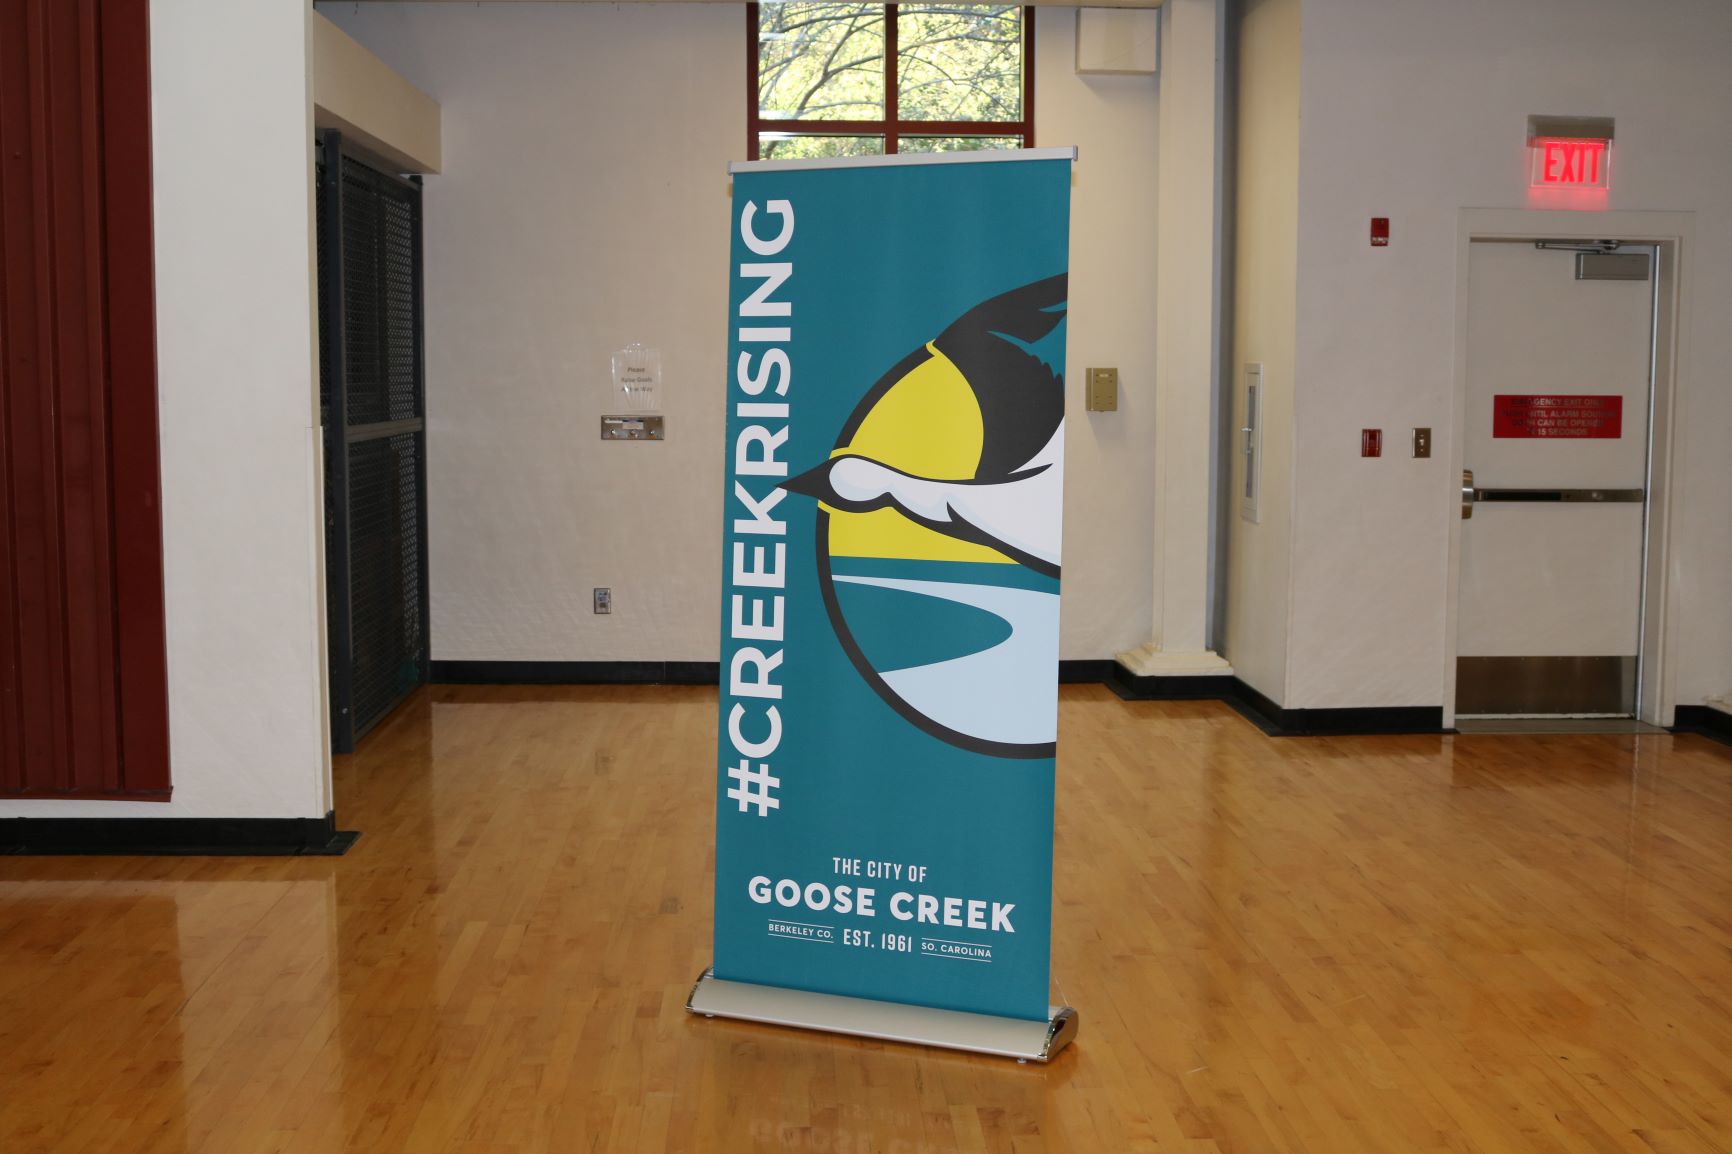 The City of Goose Creek created new branding for itself in 2018.